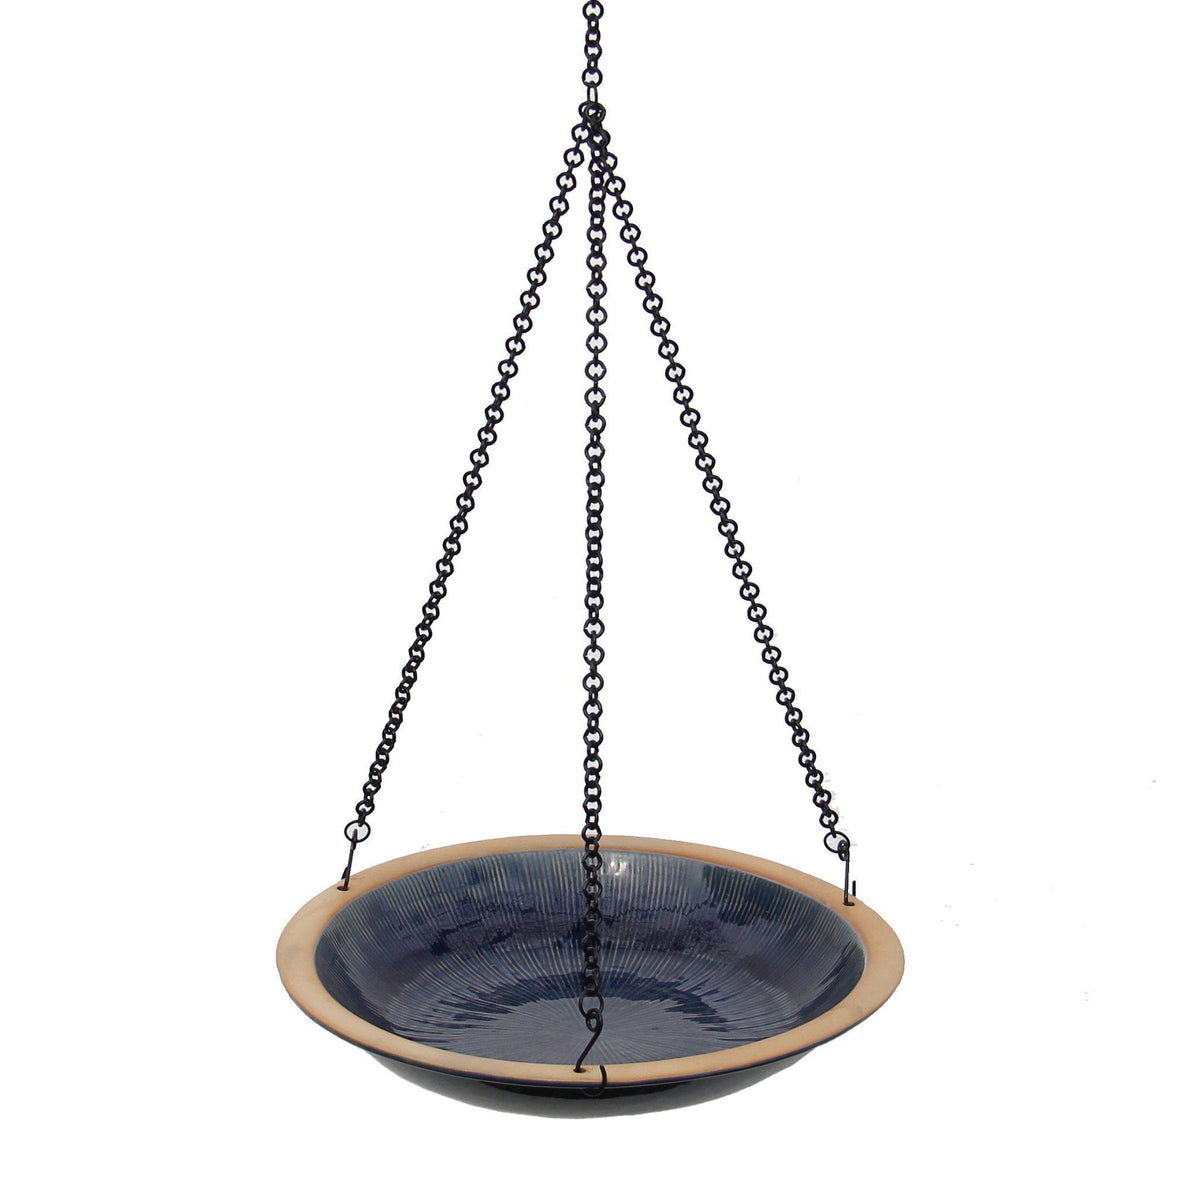 Radial Bird Bath - Hanging Style --  Byer Outlet Stock